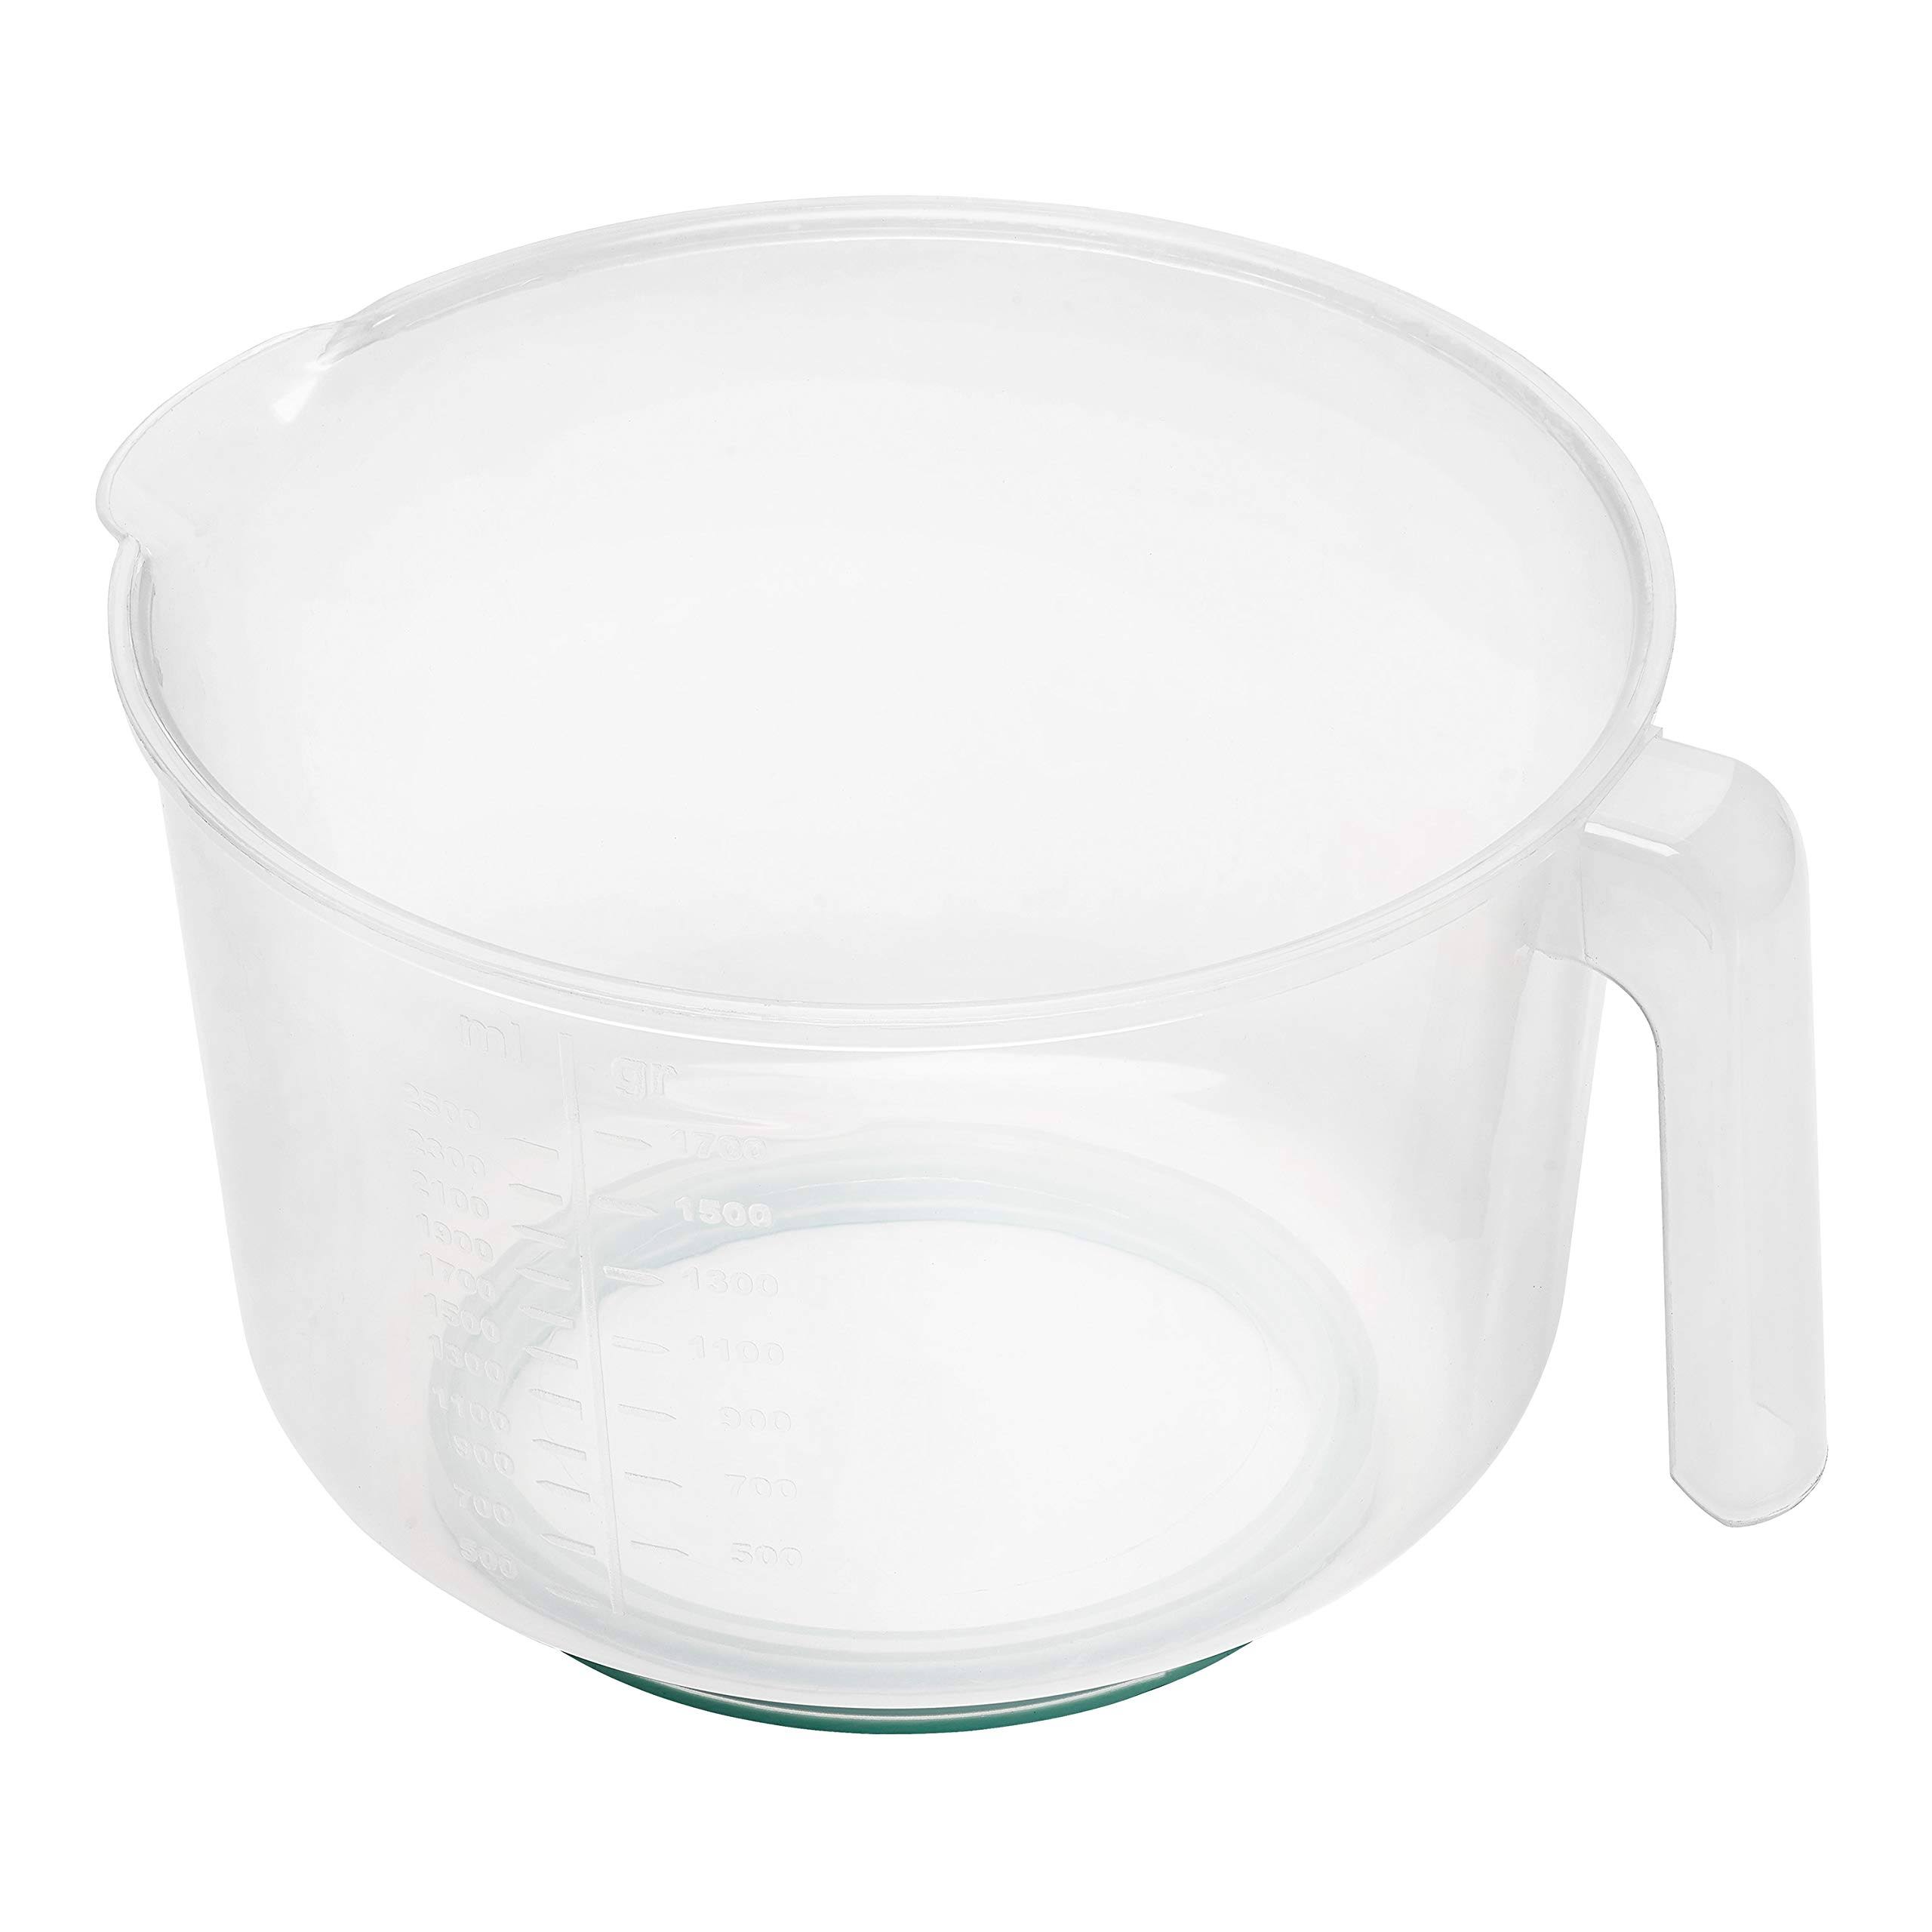 Chef Aid Contain 2.5 Litre Mixing Bowl and Jug, Microwave and Dishwasher Safe, Multi-Purpose, Ideal for Baking and Cooking